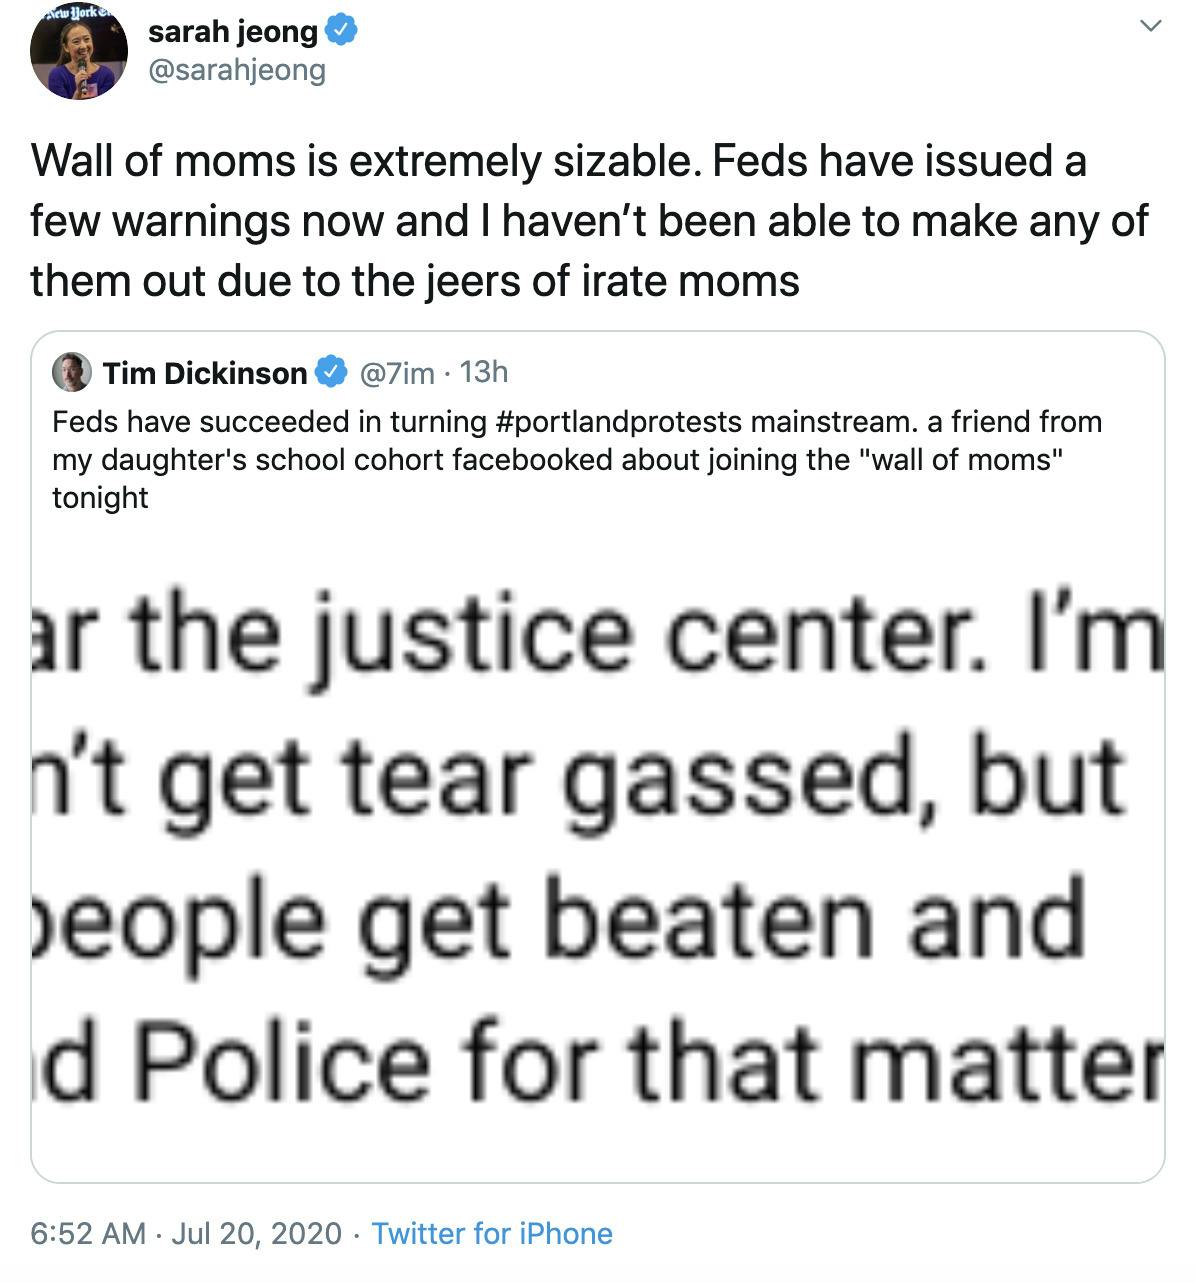 Sarah Jeong "Wall of moms is extremely sizable. Feds have issued a few warnings now and I haven’t been able to make any of them out due to the jeers of irate moms" responding to embedded "Feds have succeeded in turning #portlandprotests mainstream. a friend from my daughter's school cohort facebooked about joining the "wall of moms" tonight"